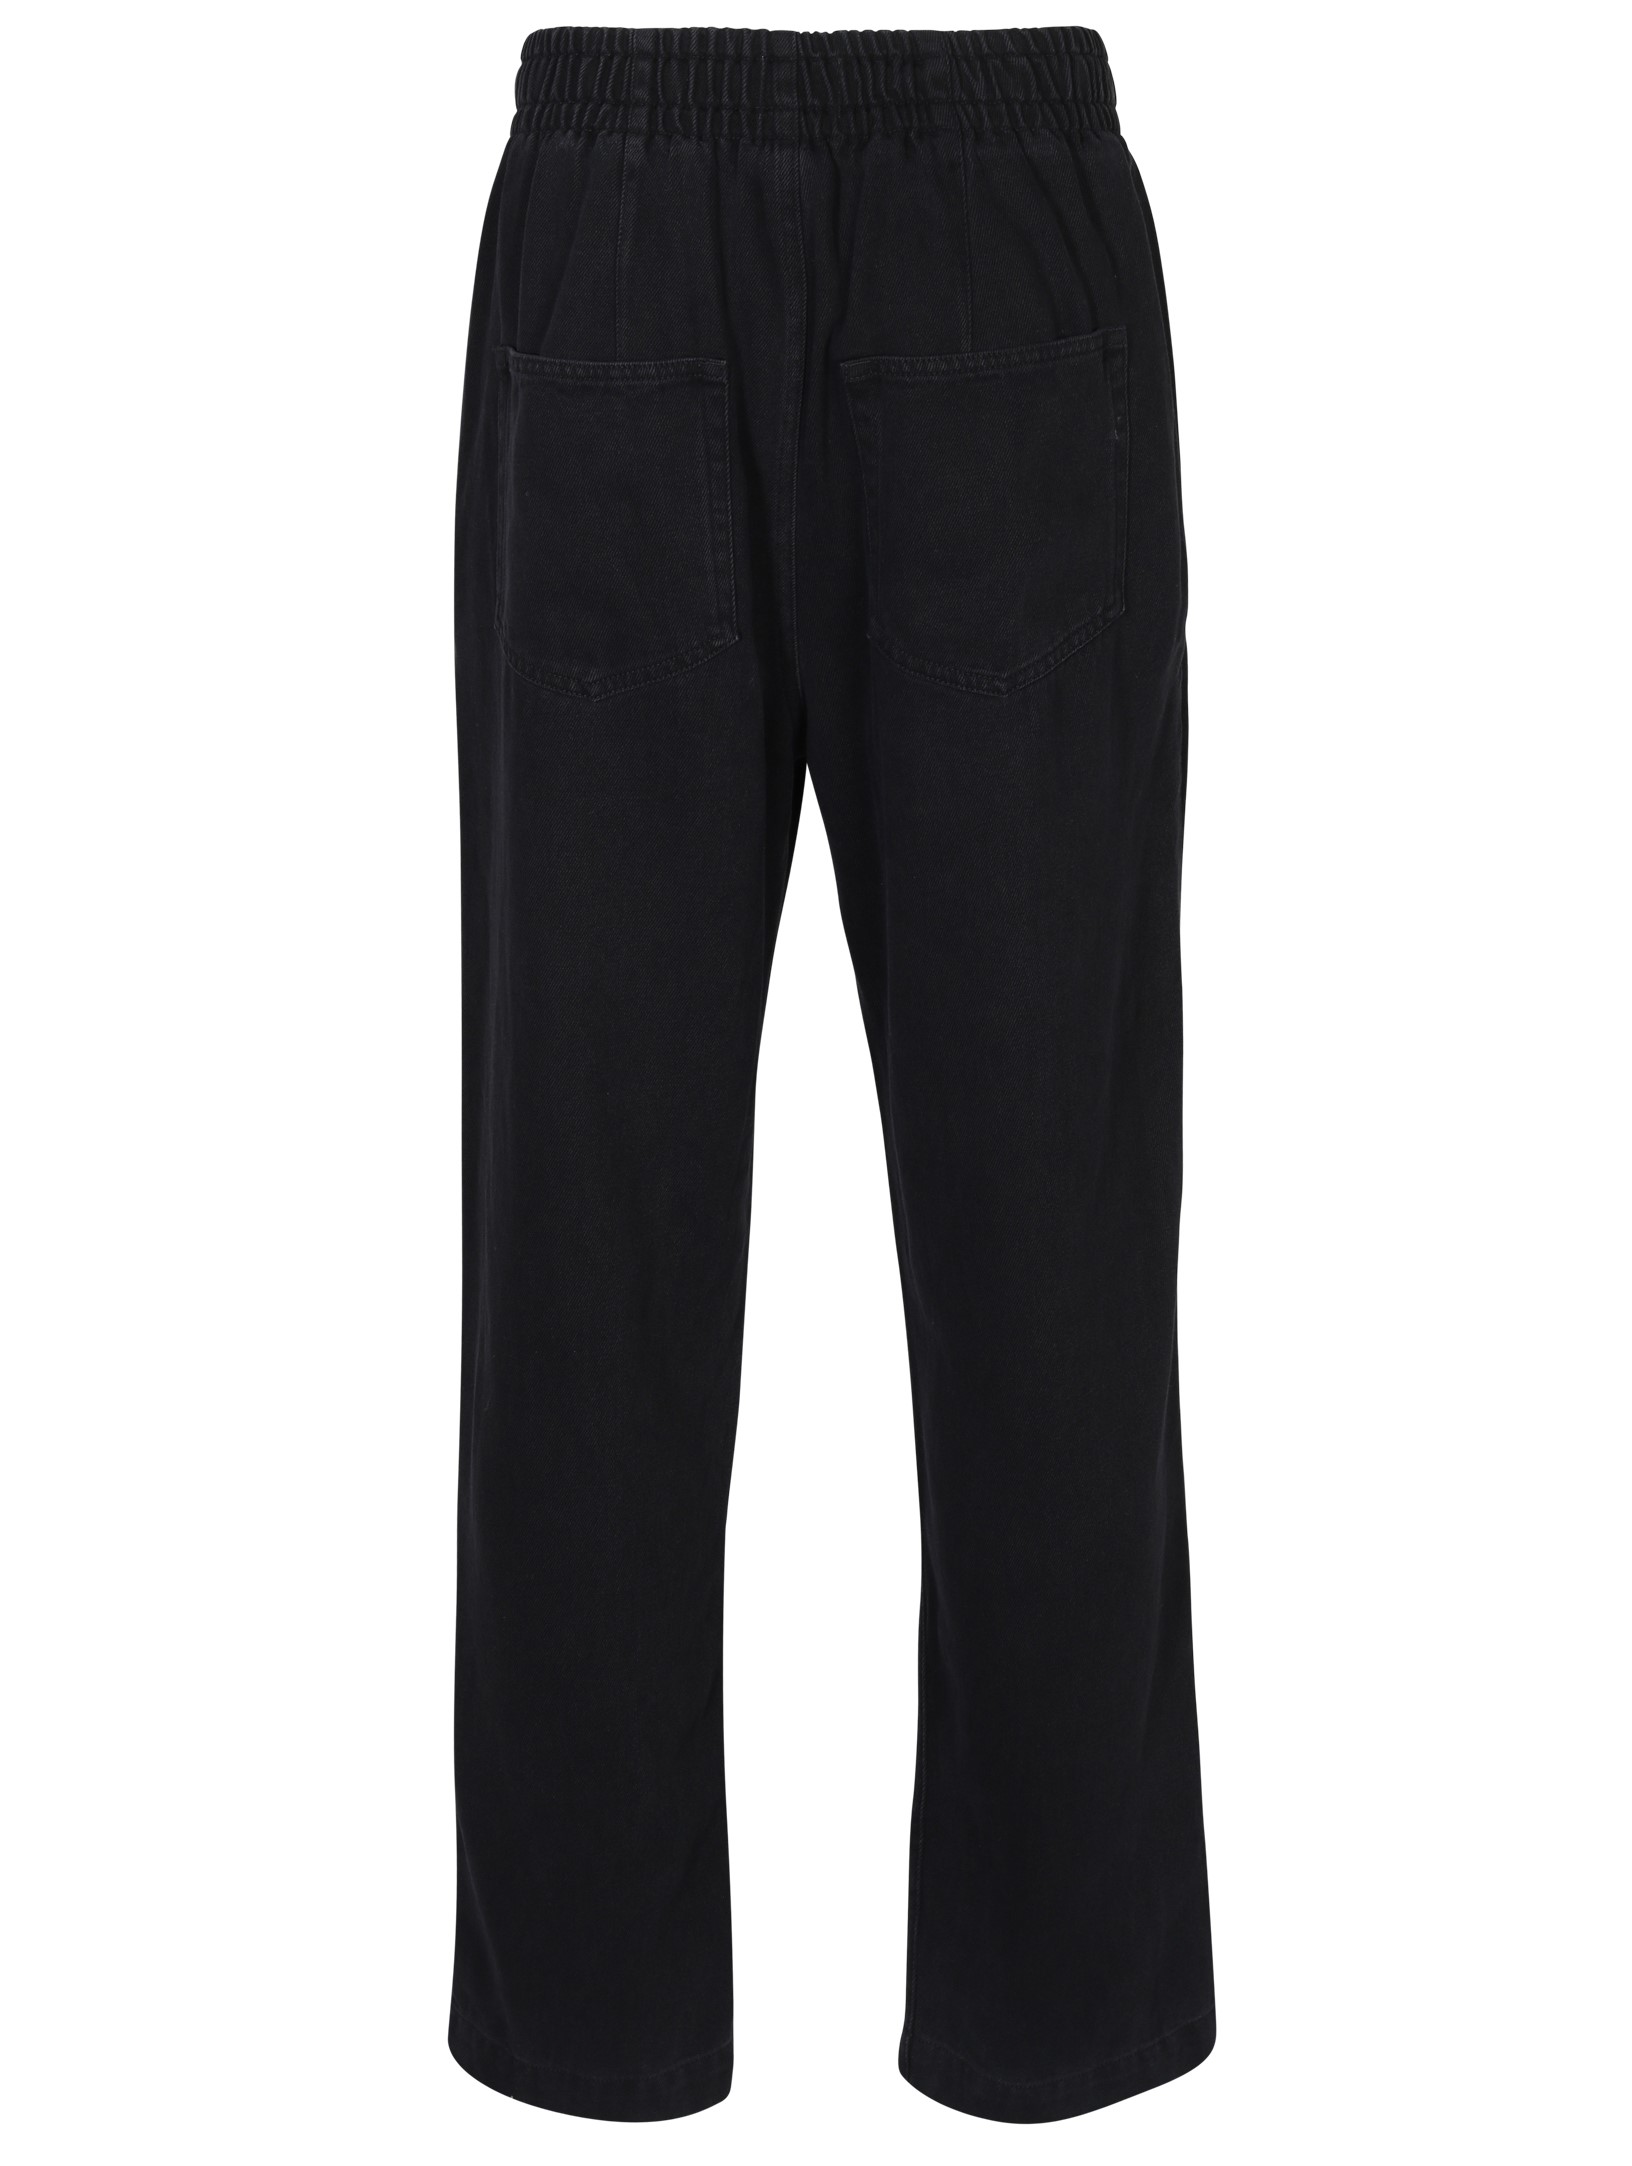 ISABEL MARANT Timeo Pant in Faded Black